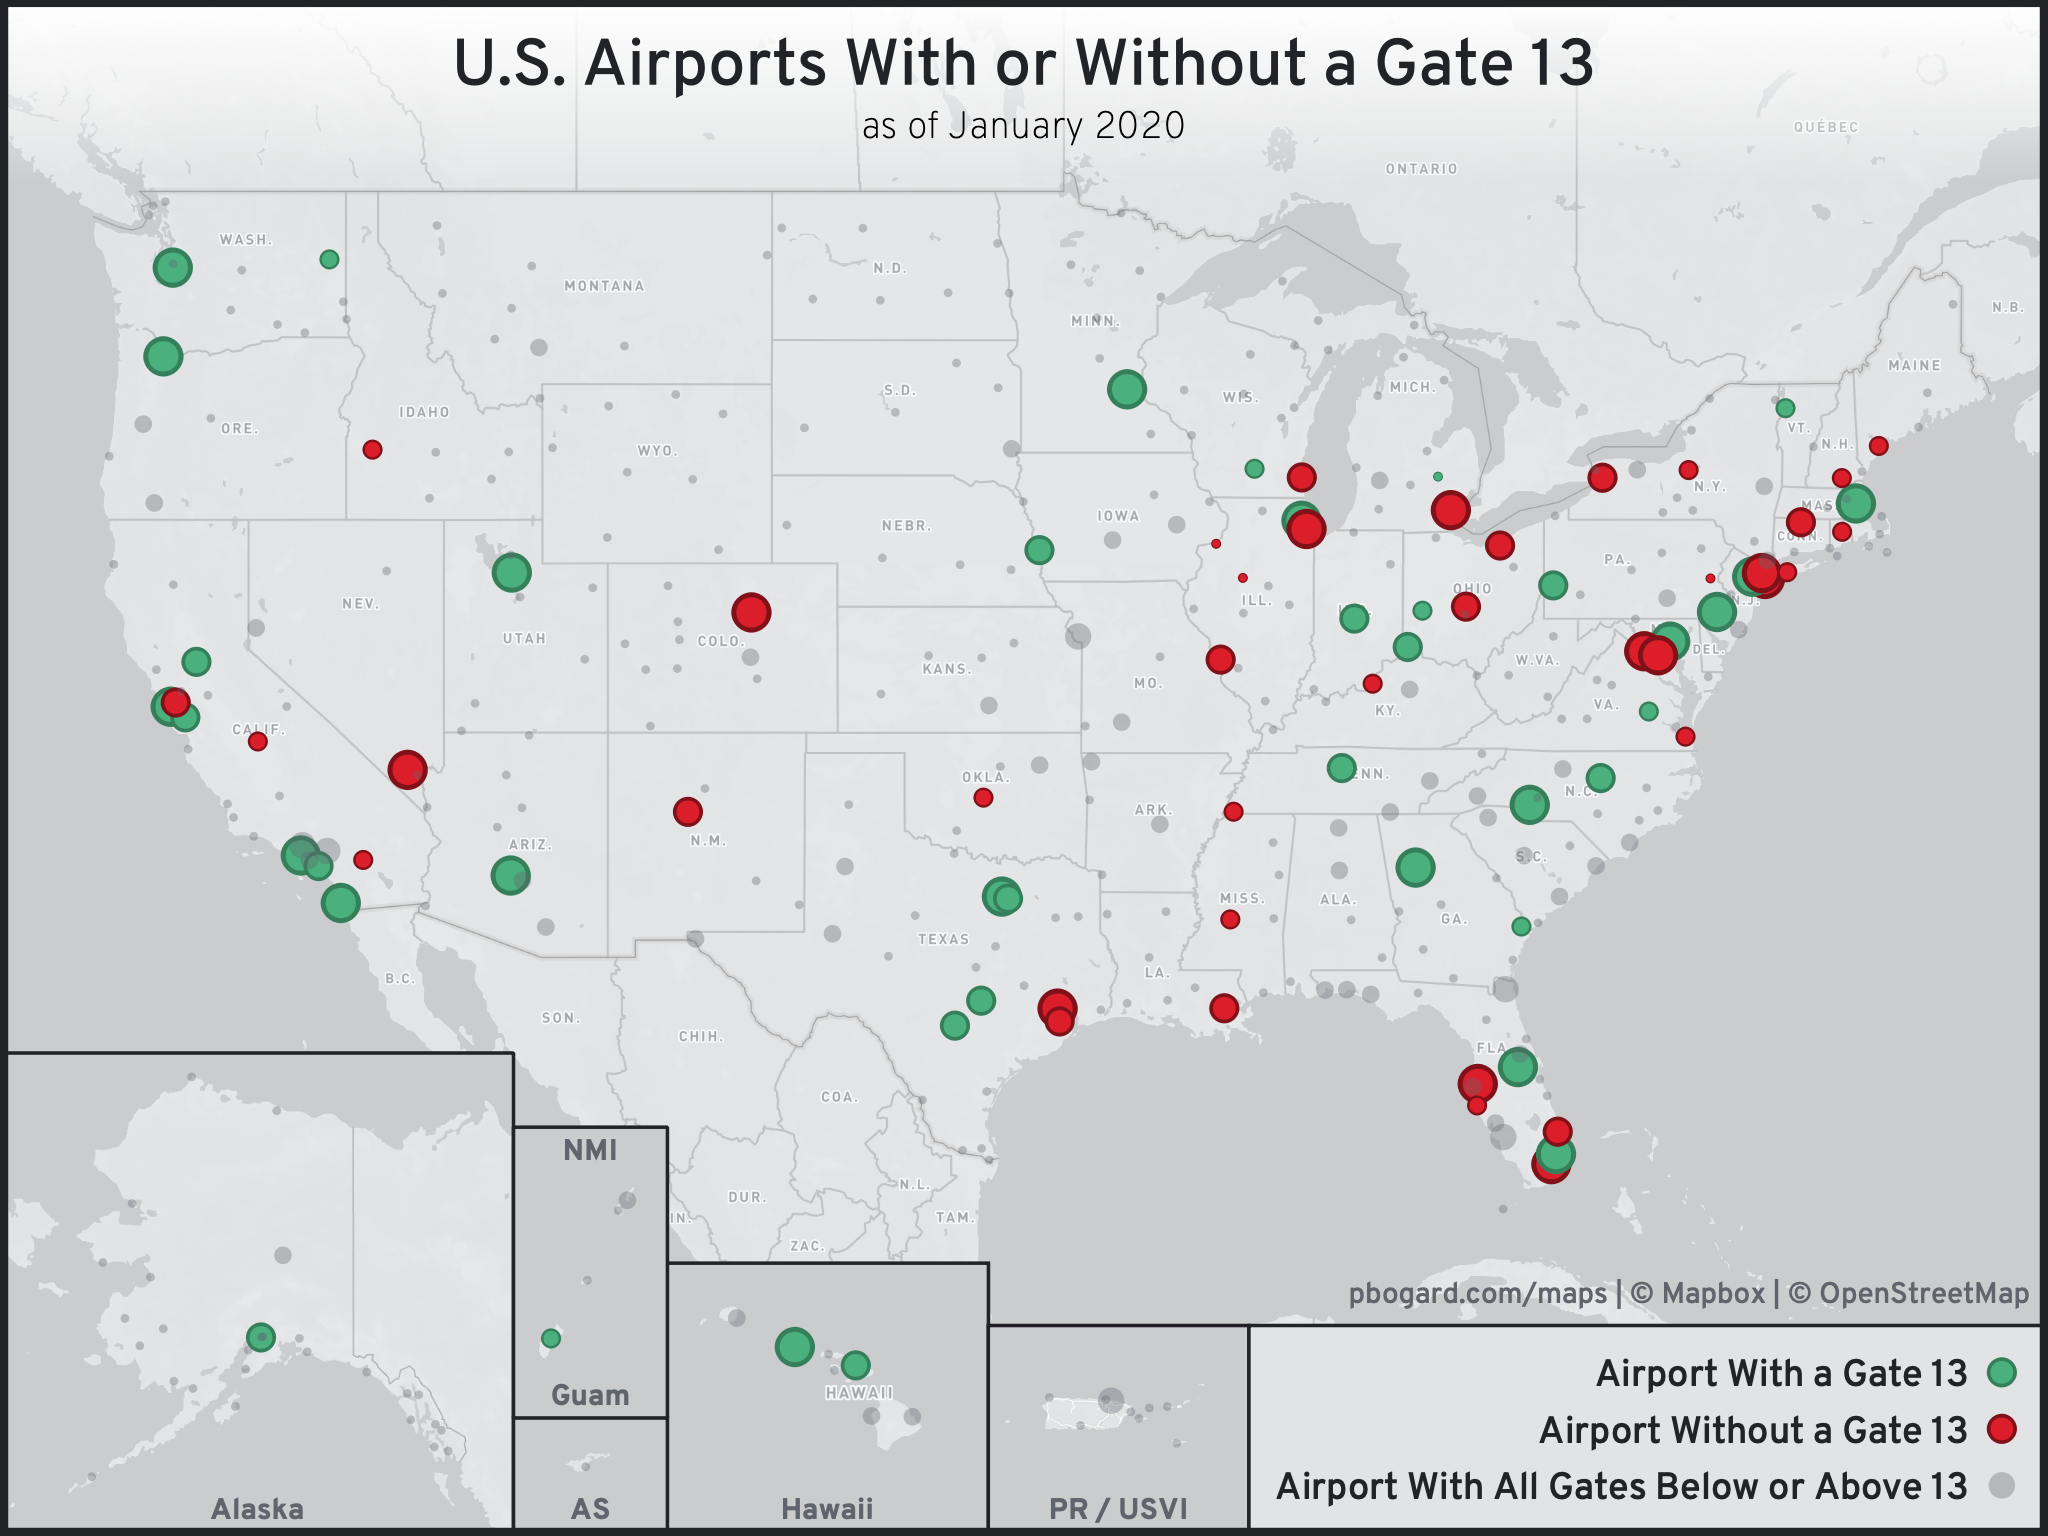 Map of the United states. Airports with a gate 13 are plotted as green dots. Airports without a gate 13 are plotted as red dots. Airports with all gates below or above 13 are plotted as gray dots.